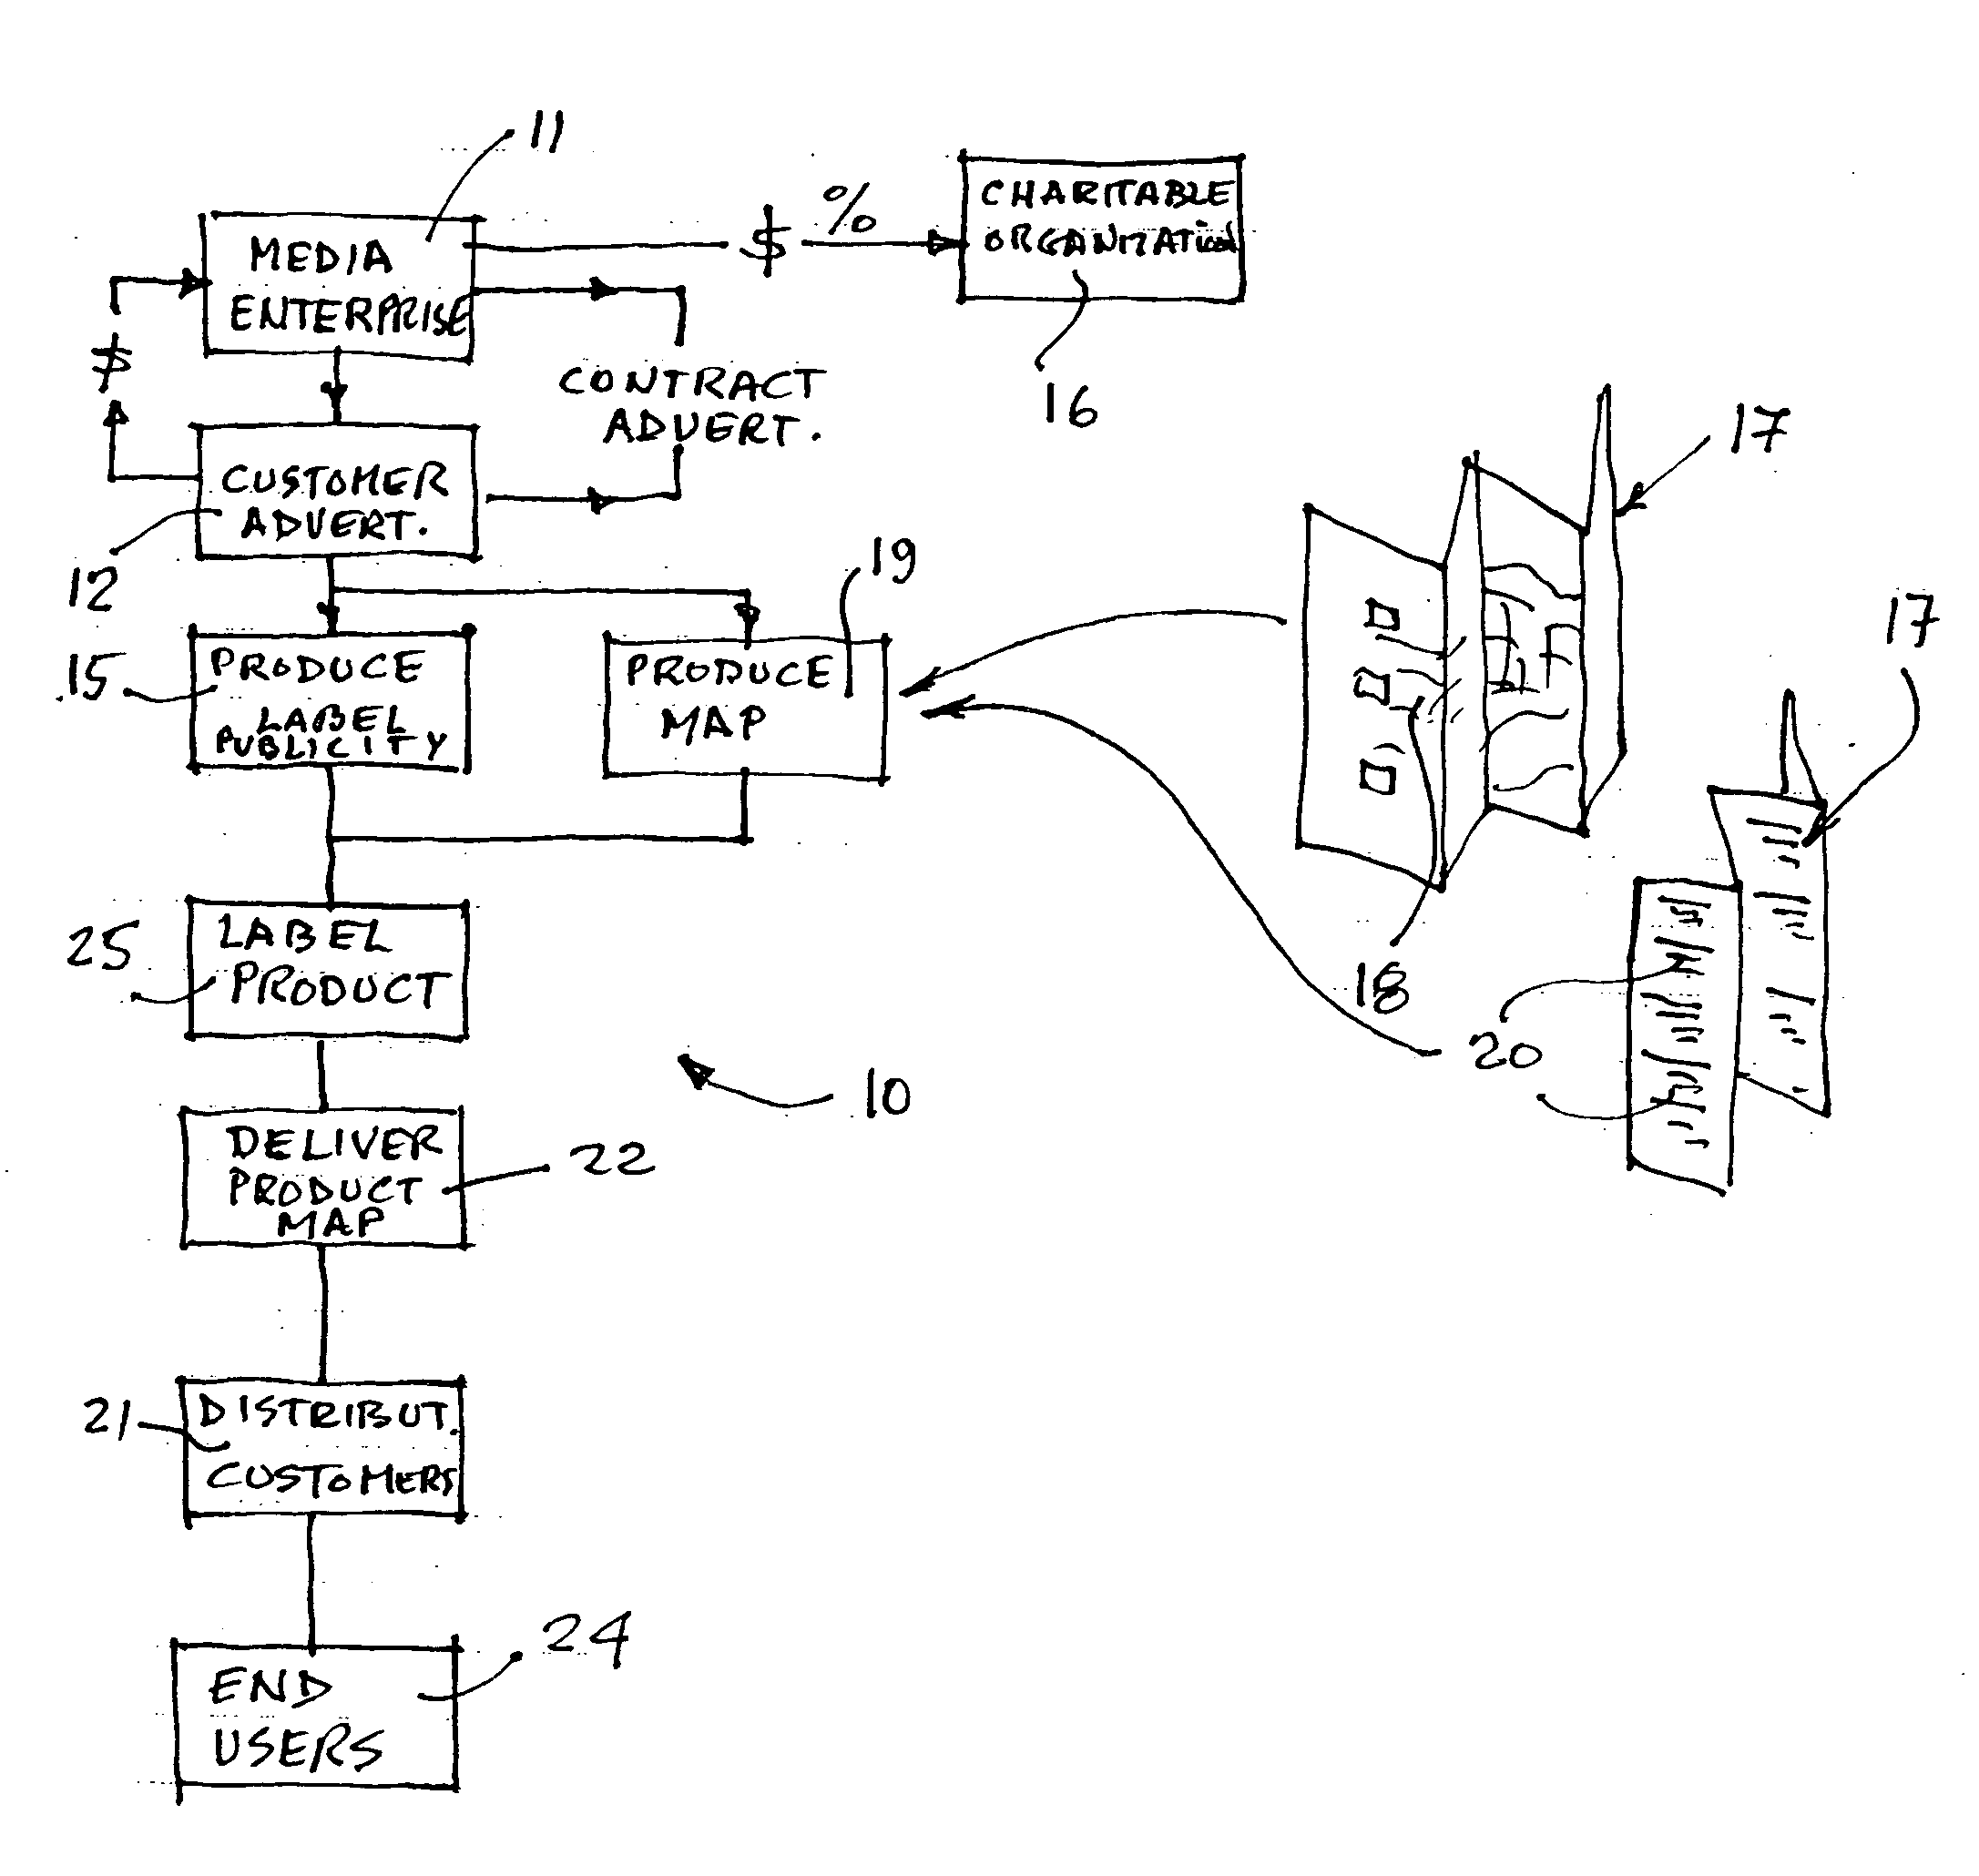 Method of advertising and related products